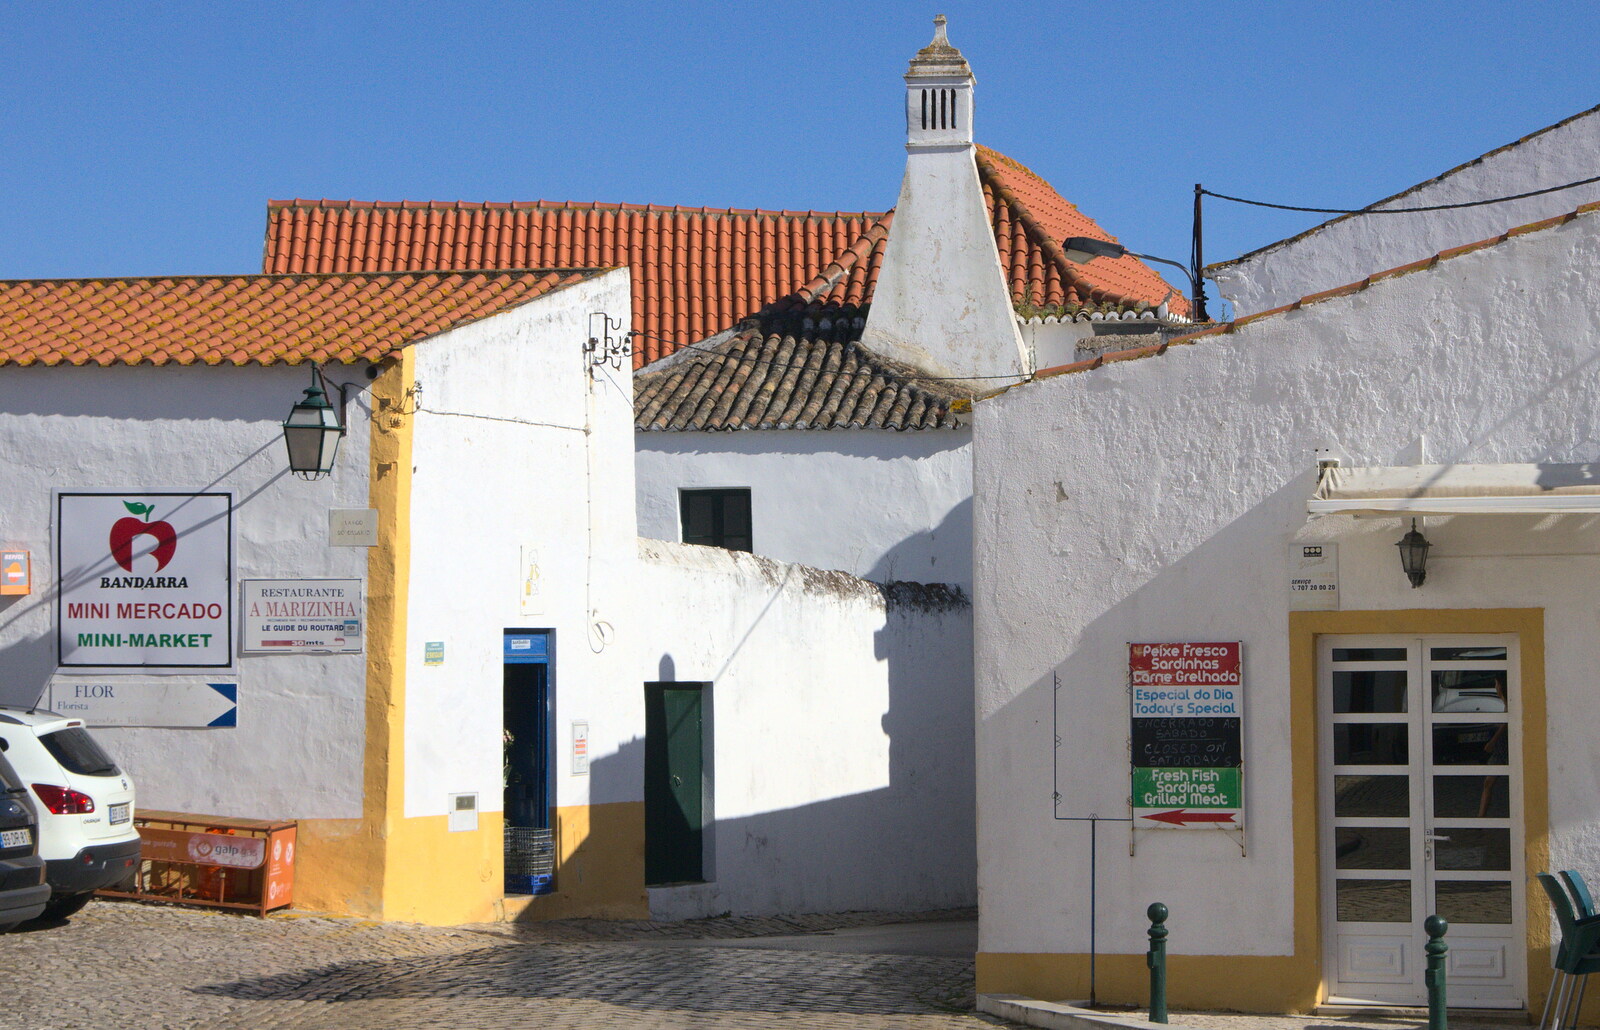 Whitewashed buildings from Gary and Vanessa's Barbeque, Alcantarilha, Algarve, Portugal - 7th April 2016